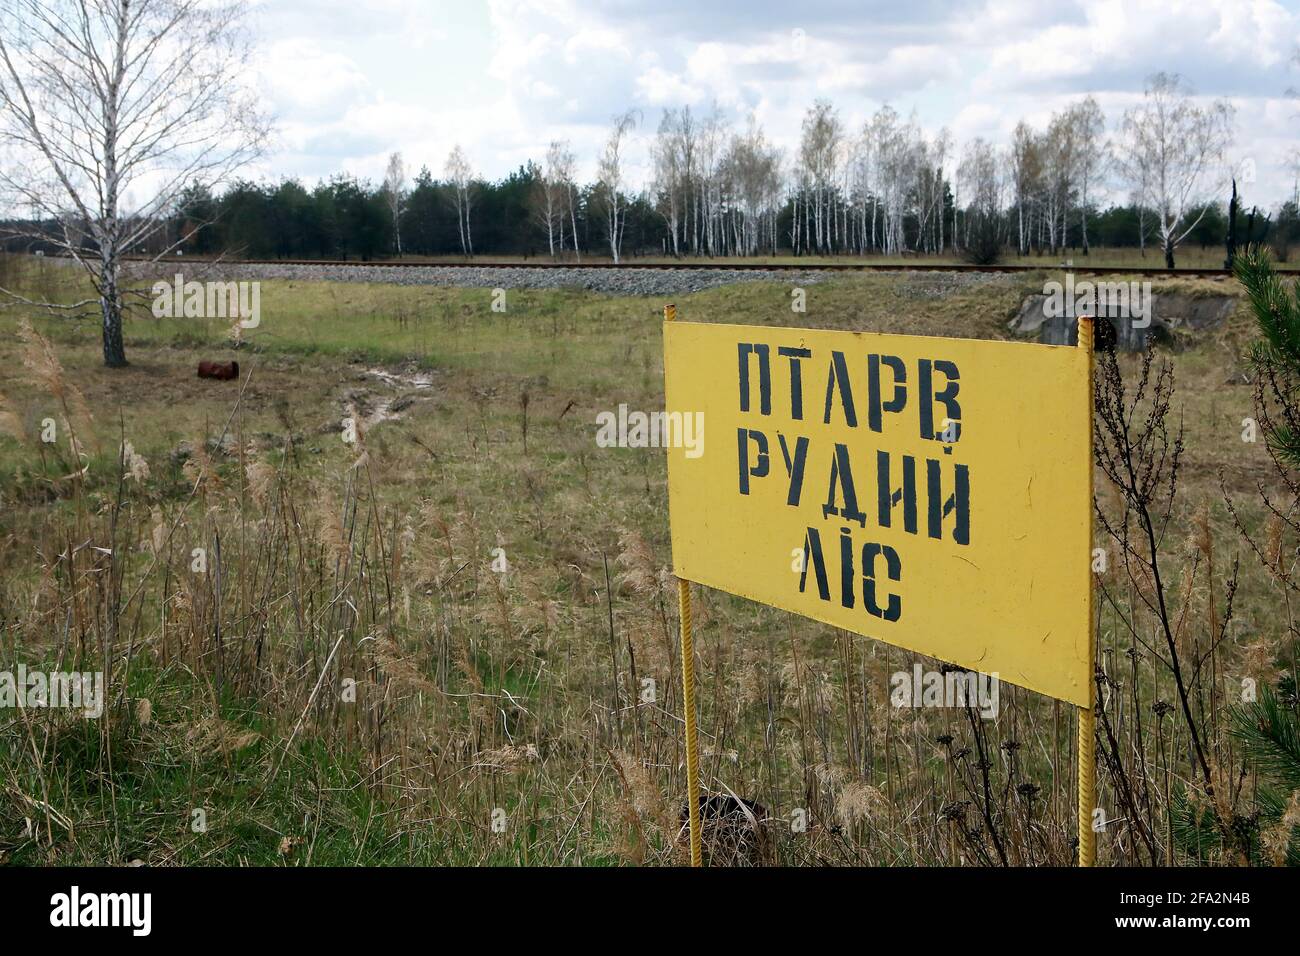 KYIV REGION, UKRAINE - APRIL 21, 2021 - The sign marks the territory of the Red Forest, Kyiv Region, northern Ukraine. Stock Photo